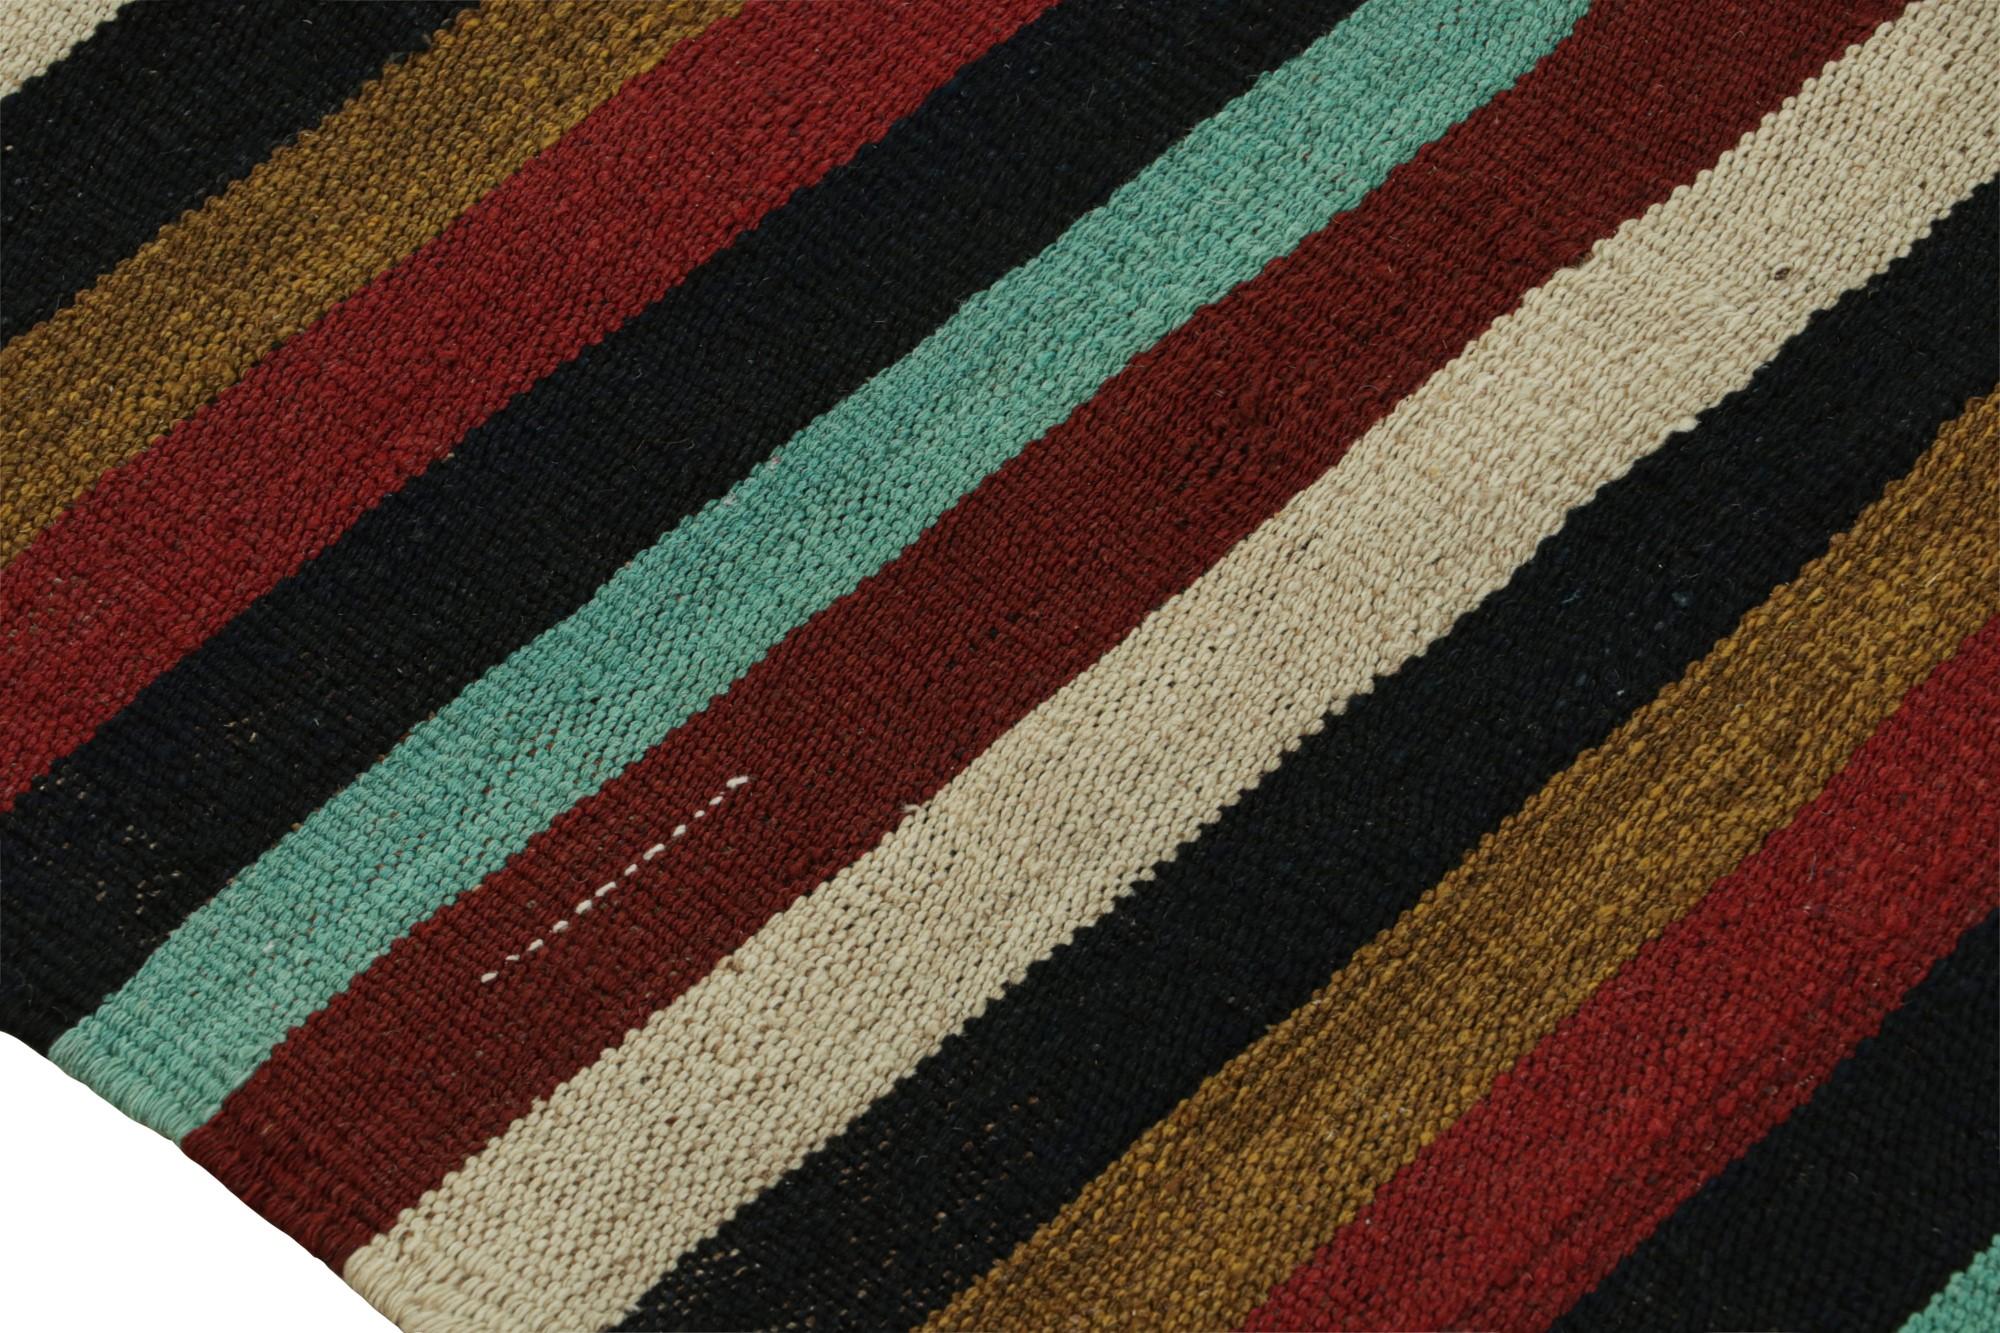 Mid-20th Century Vintage Afghan Tribal Kilim Rug with Colorful Stripes, from Rug & Kilim  For Sale